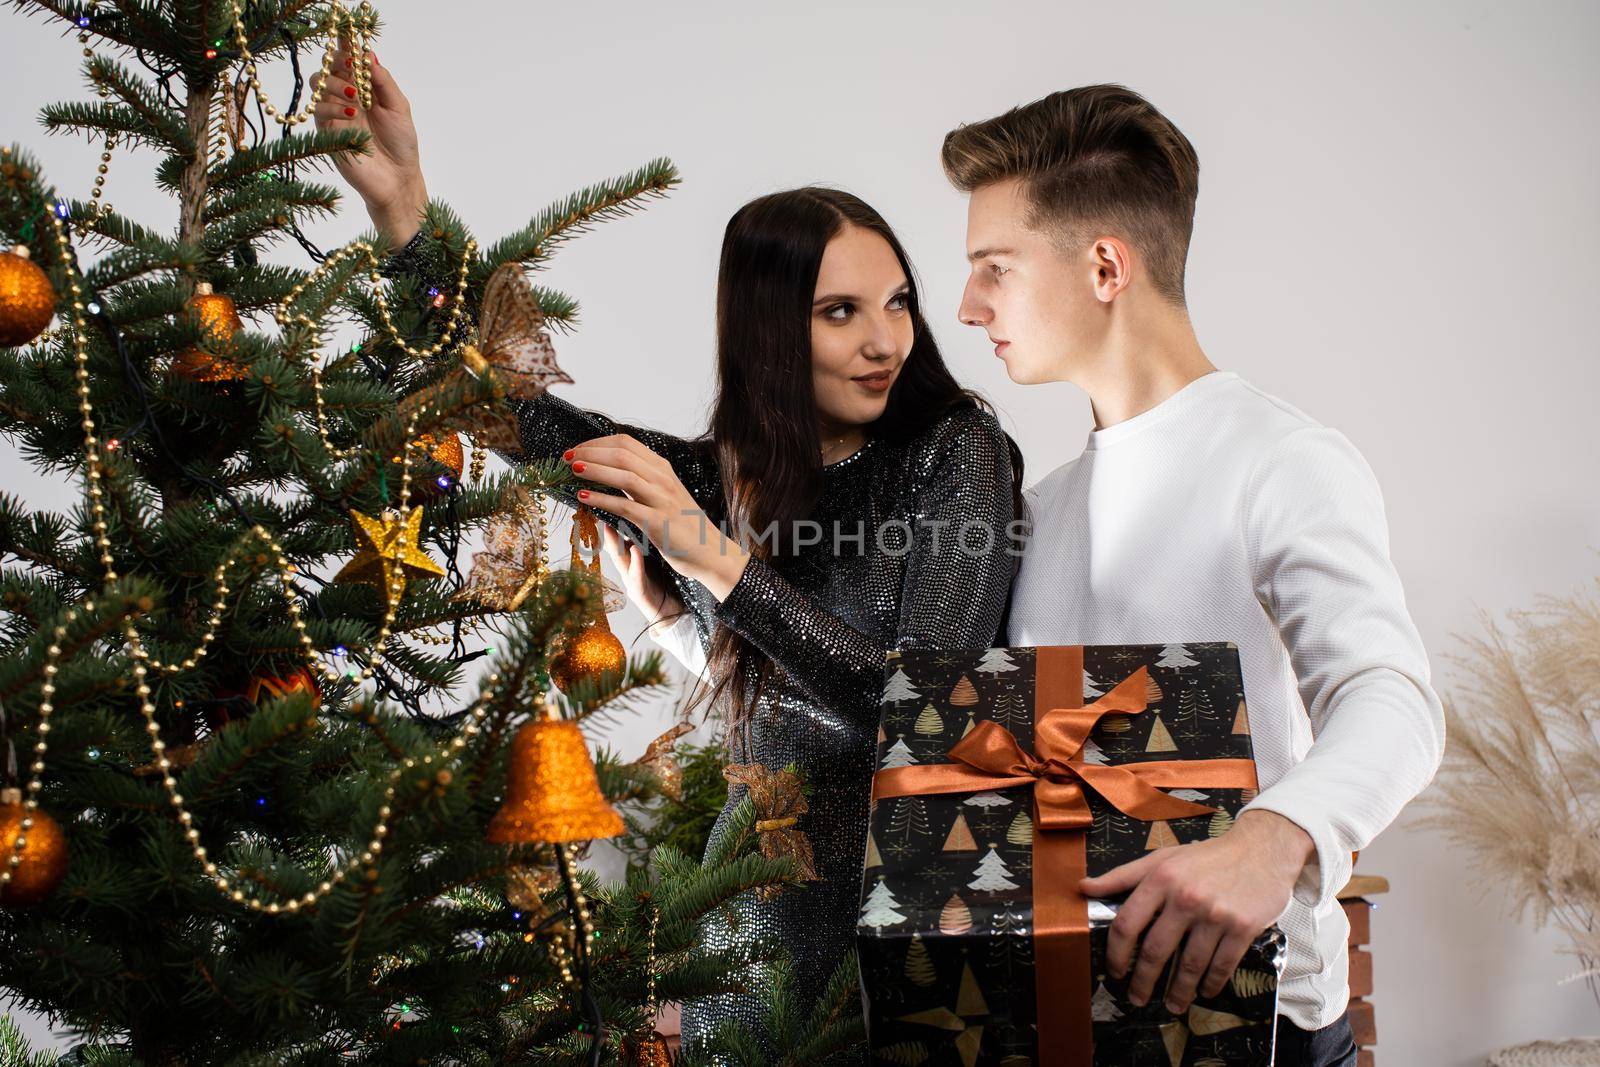 Couple in love while decorating the Christmas tree for Christmas. Smiling young people. Shiny black dress.